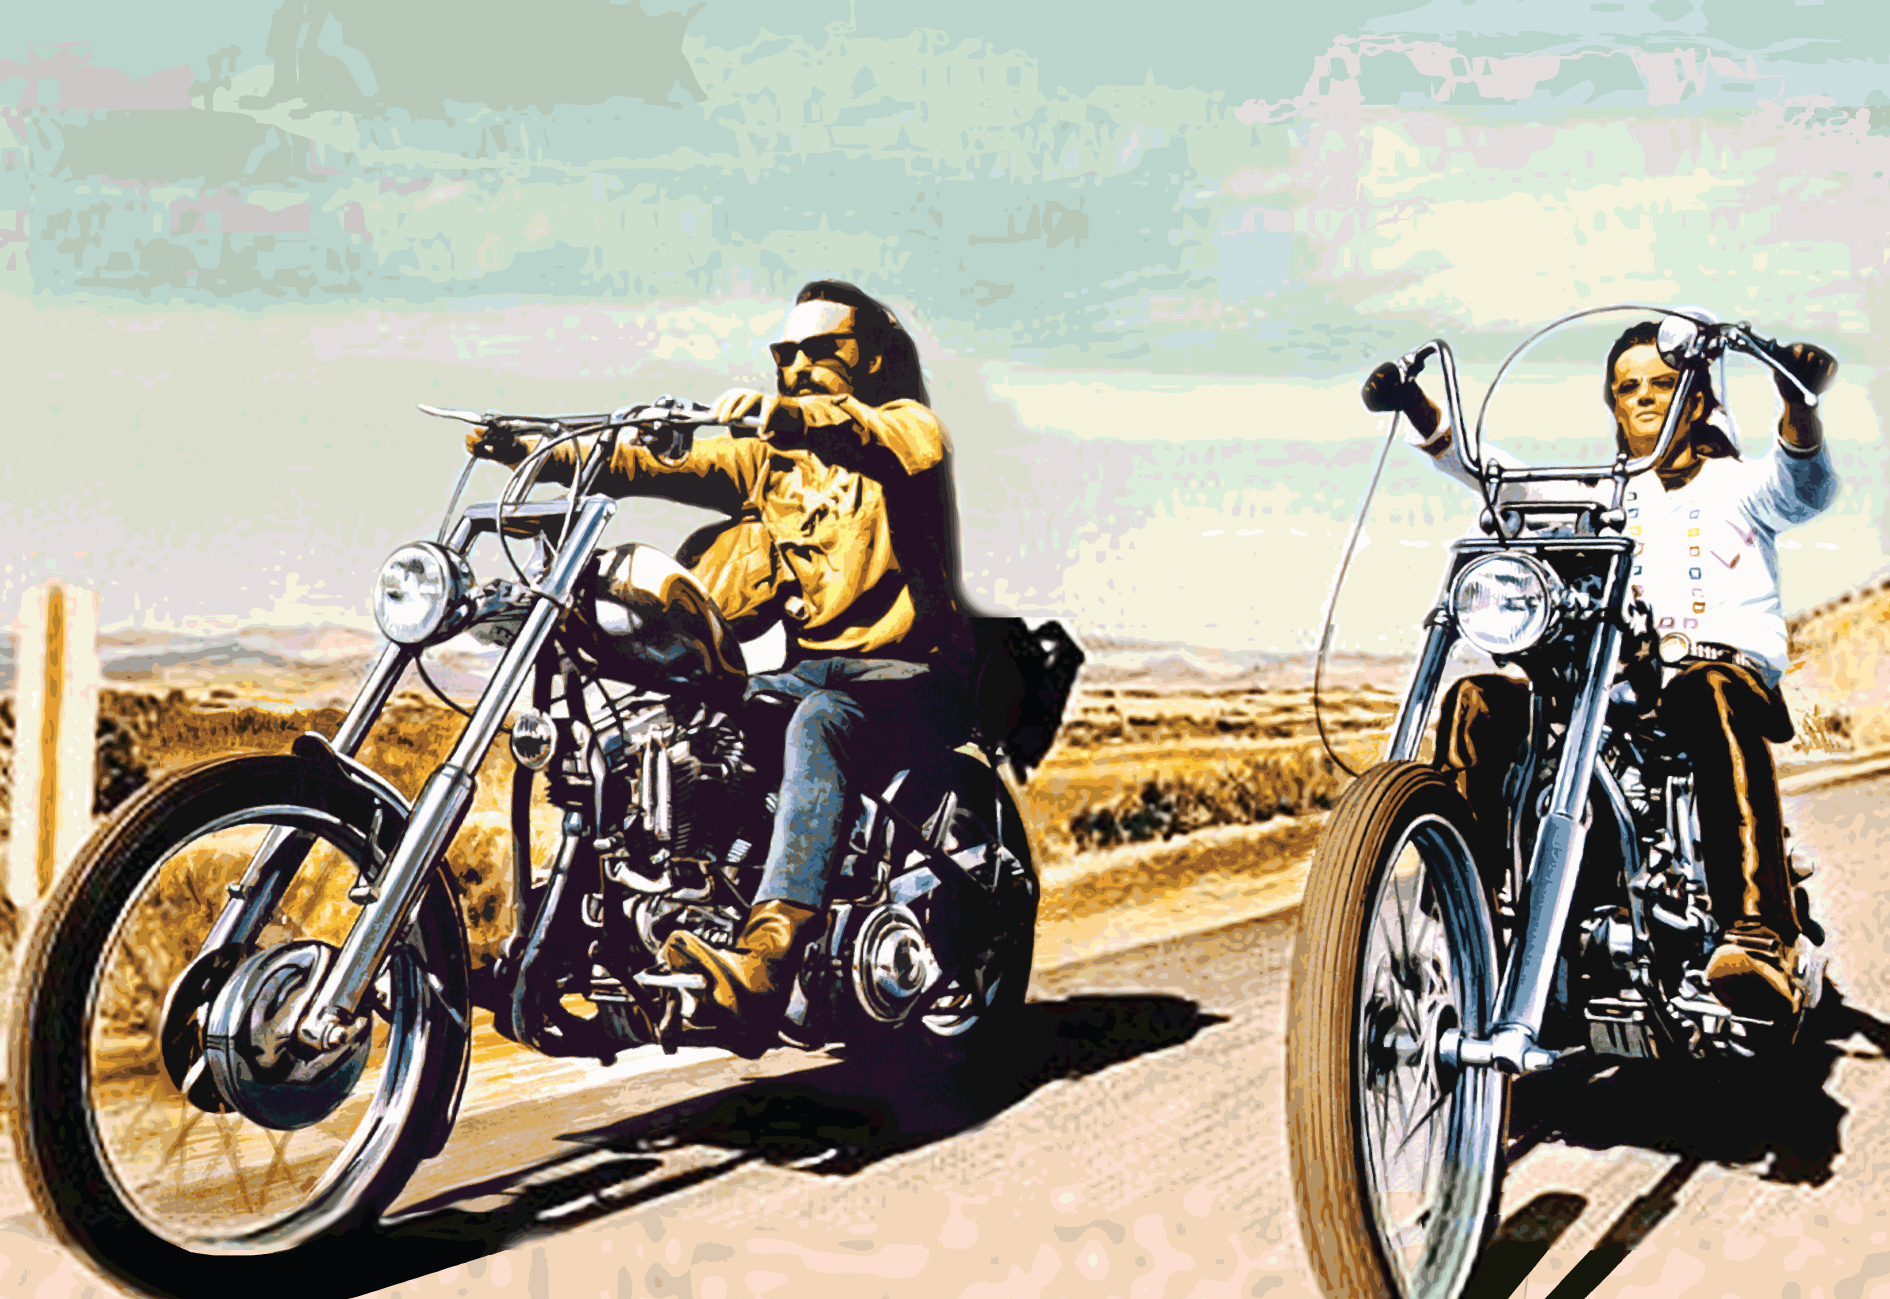 easy, Rider, Biker, Chopper, Cruise, Roads, Art, Hippy, Vehicles, Motorcycles, Bikes, Sled, Sky, Clouds, Landscapes Wallpaper